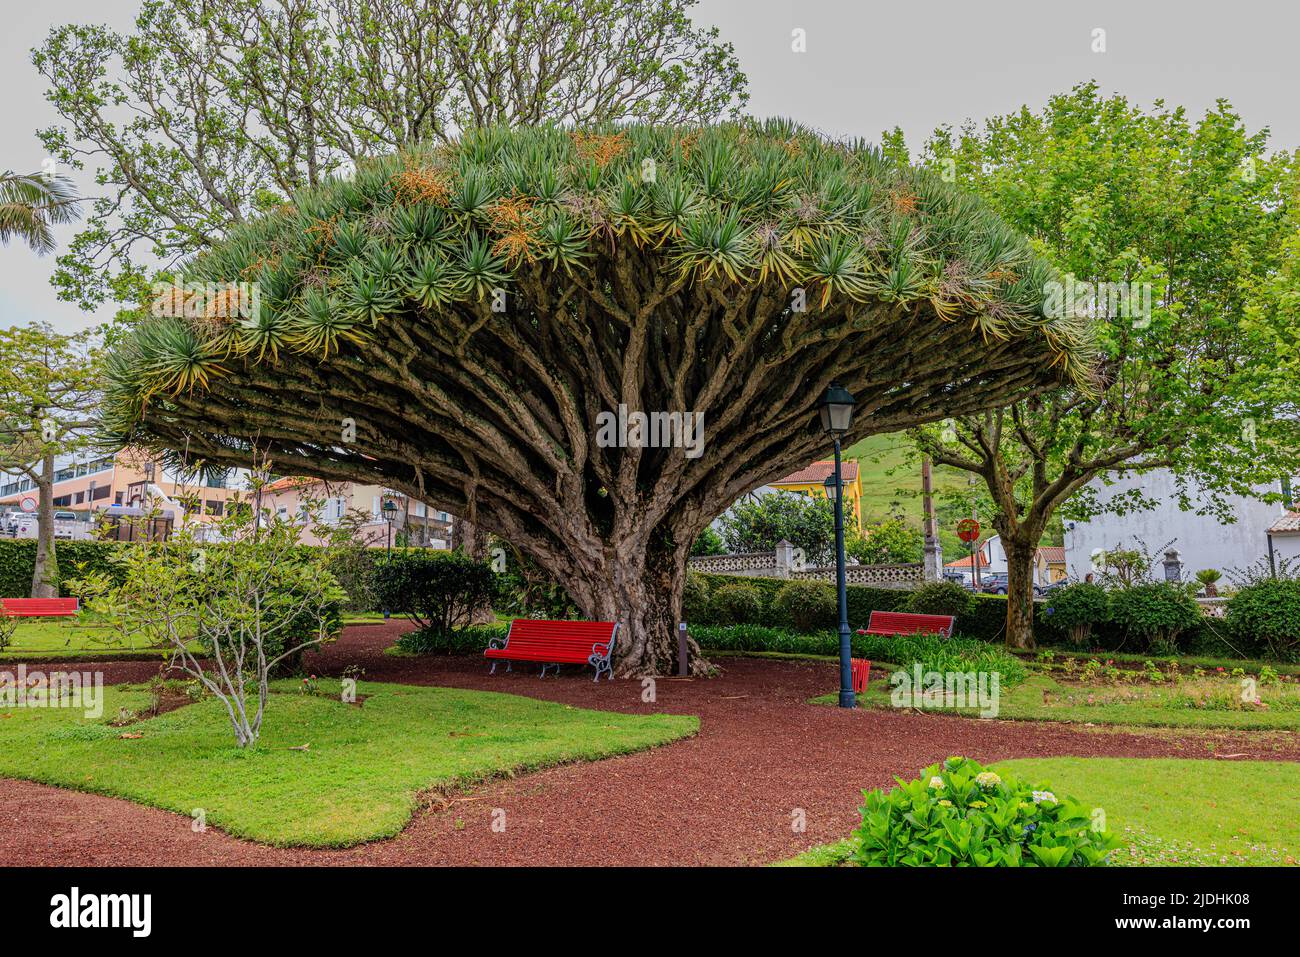 the spreading branches of an enormous umbrella shaped dragon tree give welcome shade in jardim de florencia terra in horta azores Stock Photo